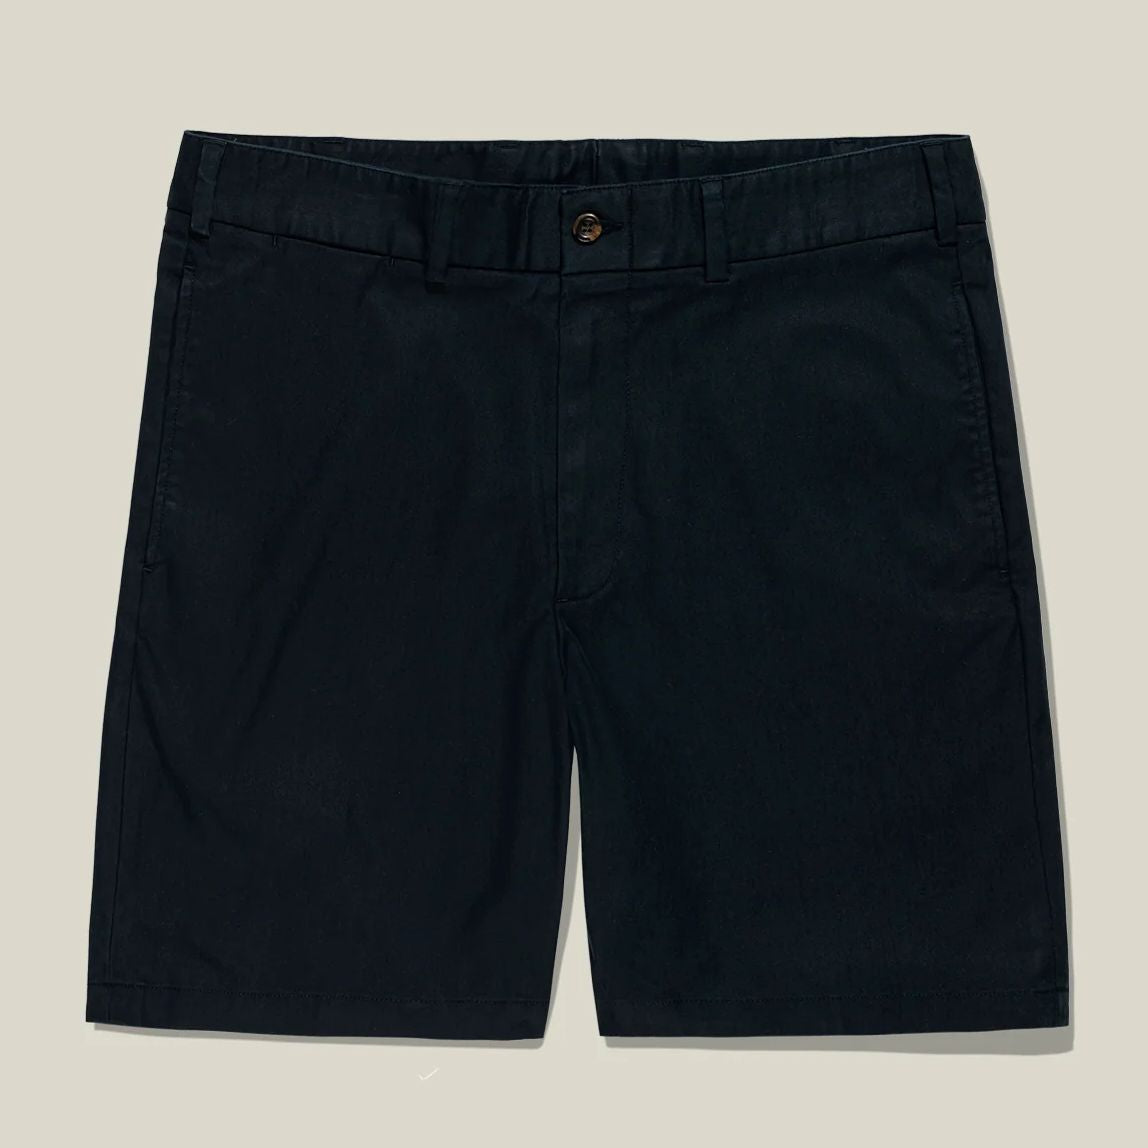 M2 Classic Fit Travel Twill Shorts in Navy by Bills Khakis